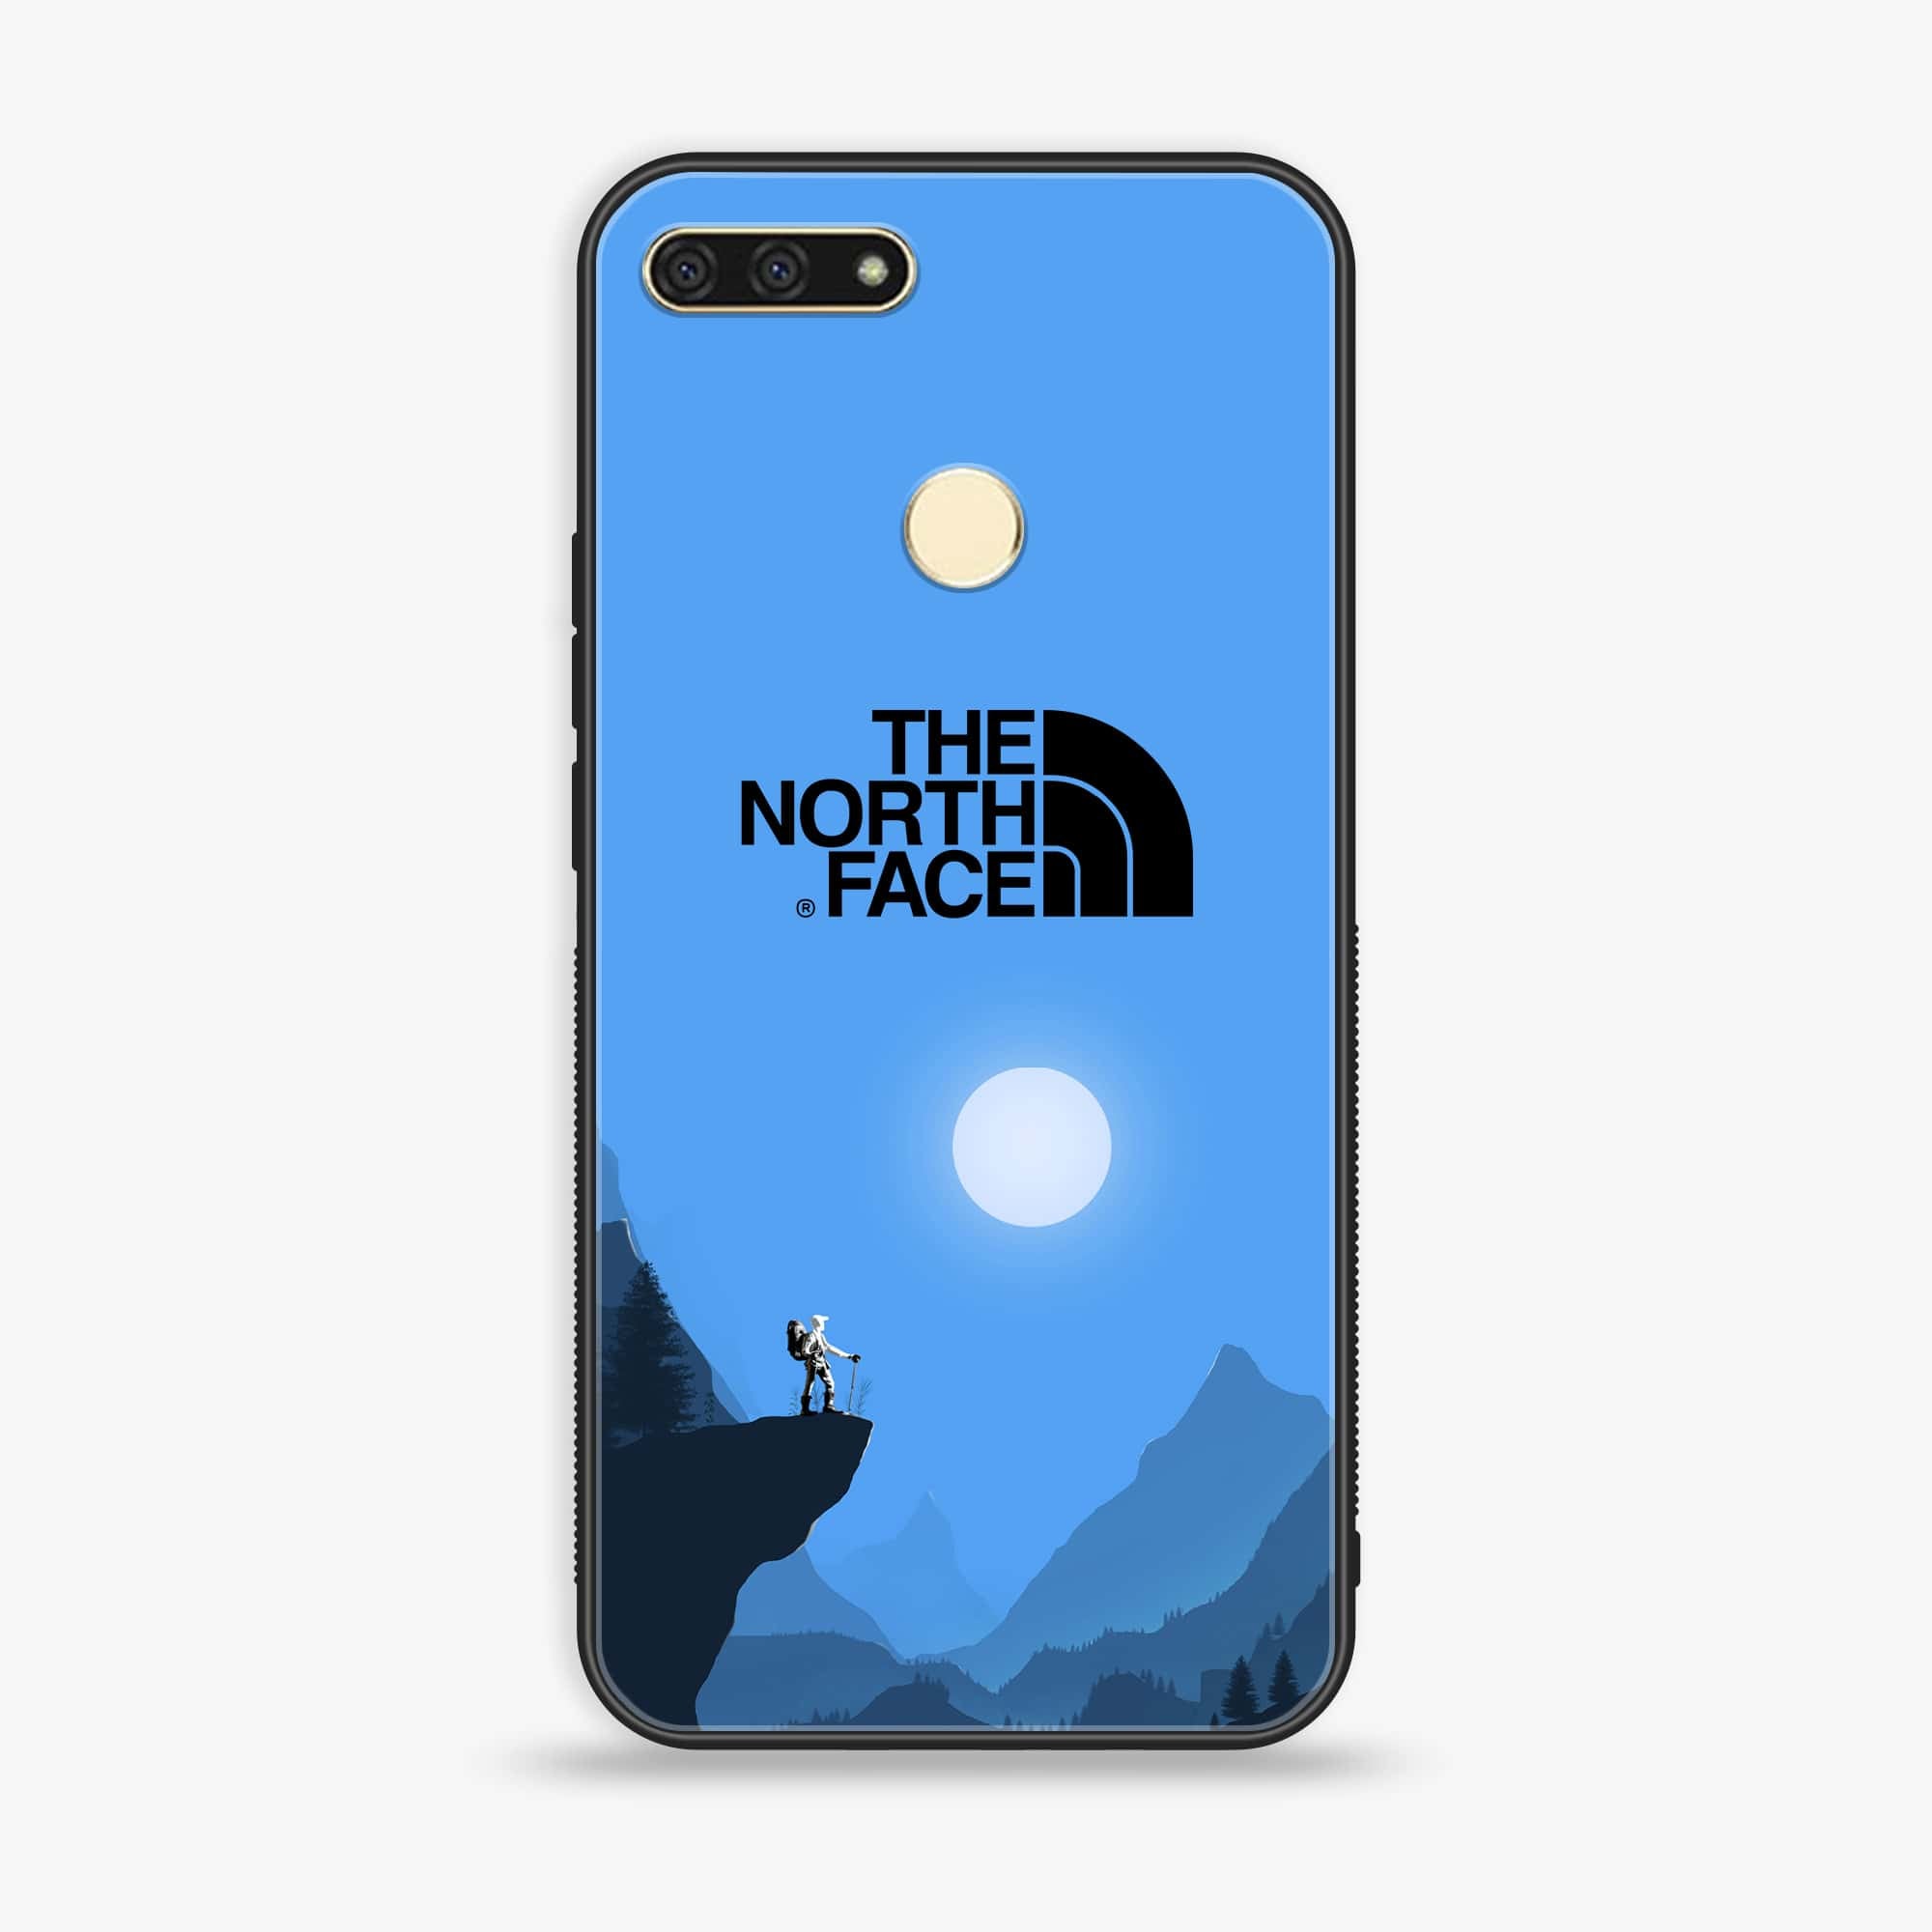 Huawei Y6 2018/Honor Play 7A - The North Face Series - Premium Printed Glass soft Bumper shock Proof Case